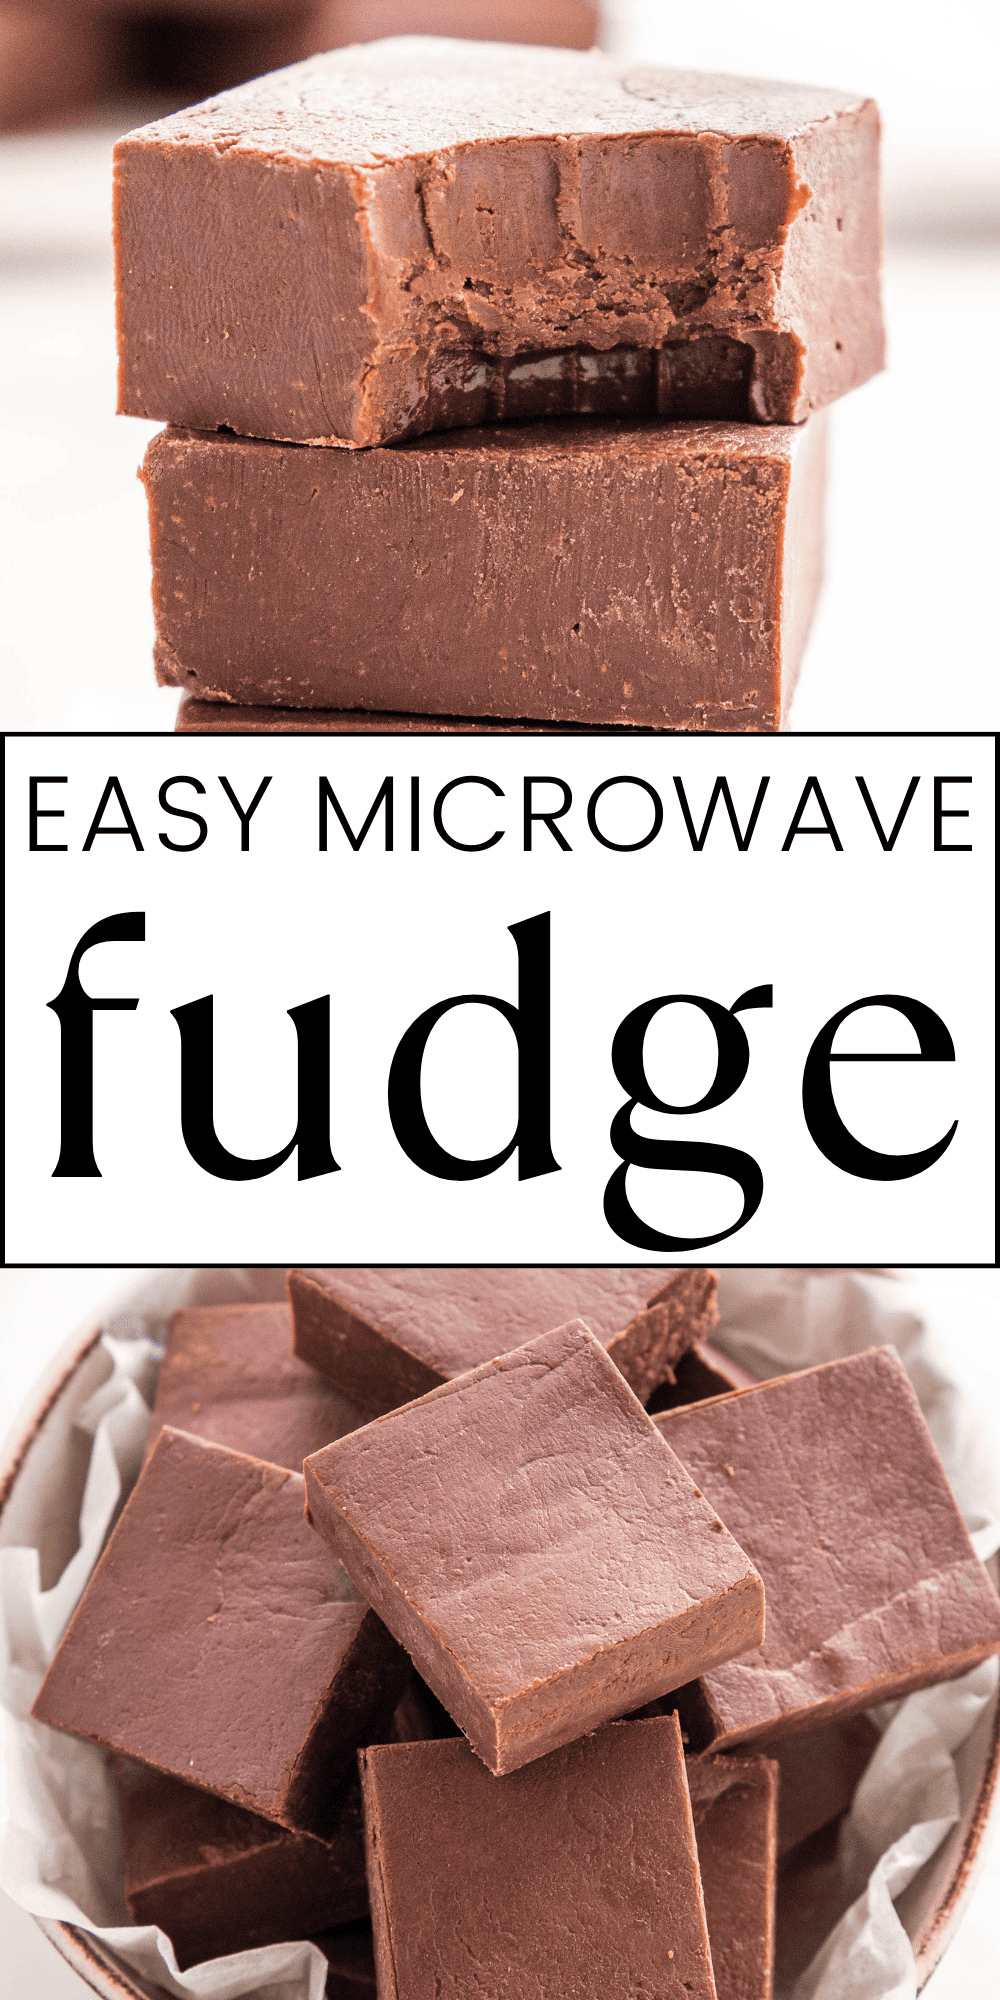 This Easy Fudge recipe is the perfect easy-to-make treat that's ready in minutes and made with only 2 simple ingredients! A quick stove-top or microwave fudge recipe - no candy thermometer required! Recipe from thebusybaker.ca! #fudge #easyfudge #fudgerecipe #christmasfudge #besteasyfudge #holidaybaking #holidayfudge #christmasbaking via @busybakerblog